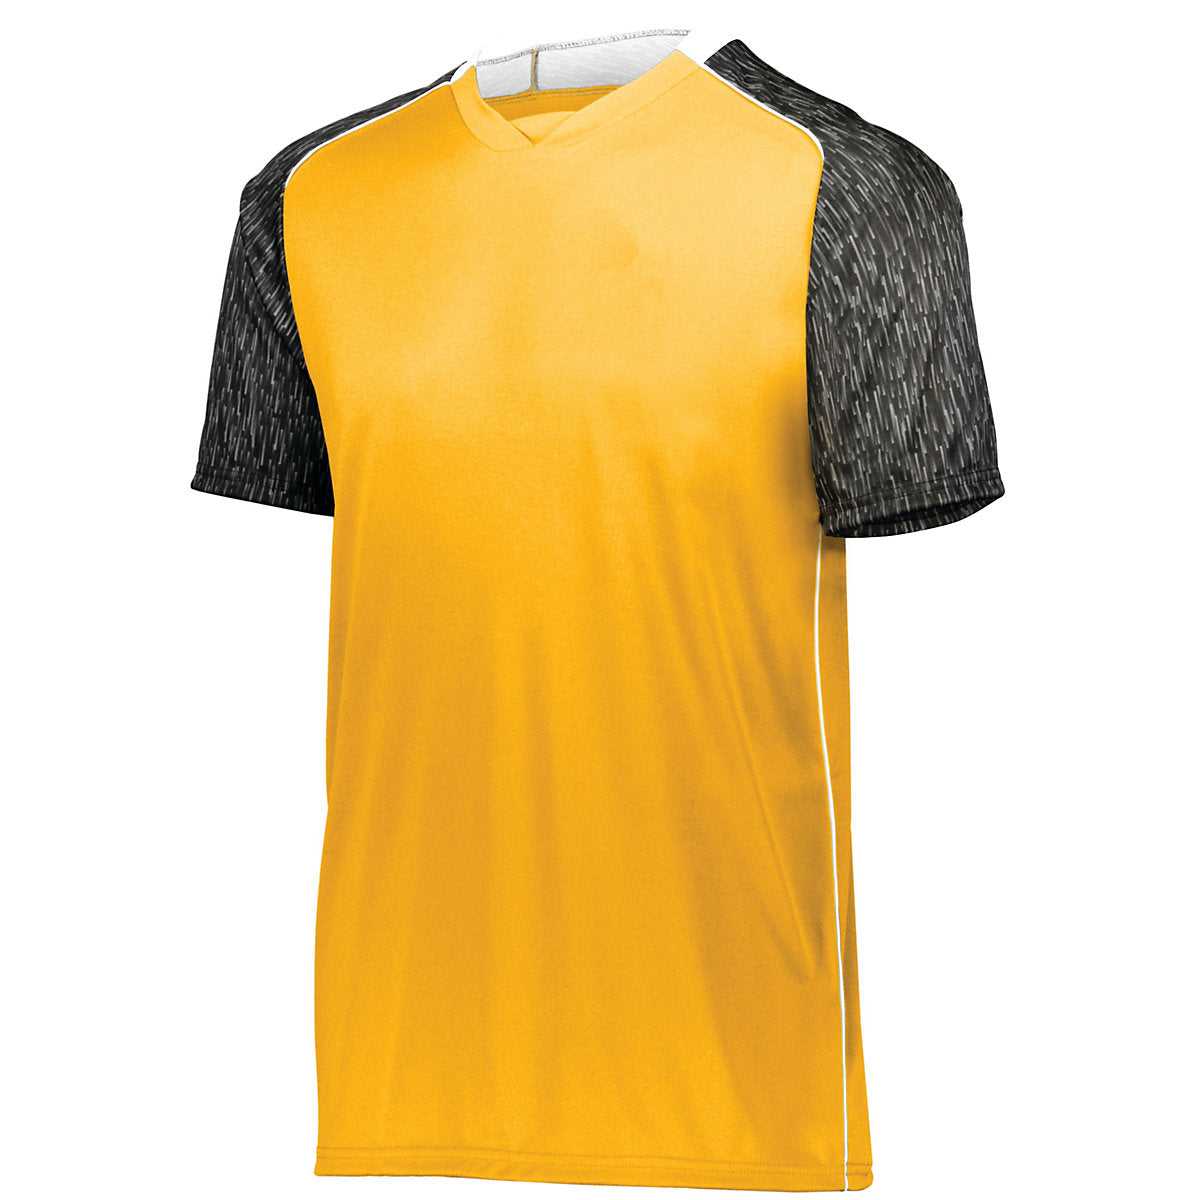 High Five 322940 Hawthorn Soccer Jersey - Athletic Gold Black Print Wh